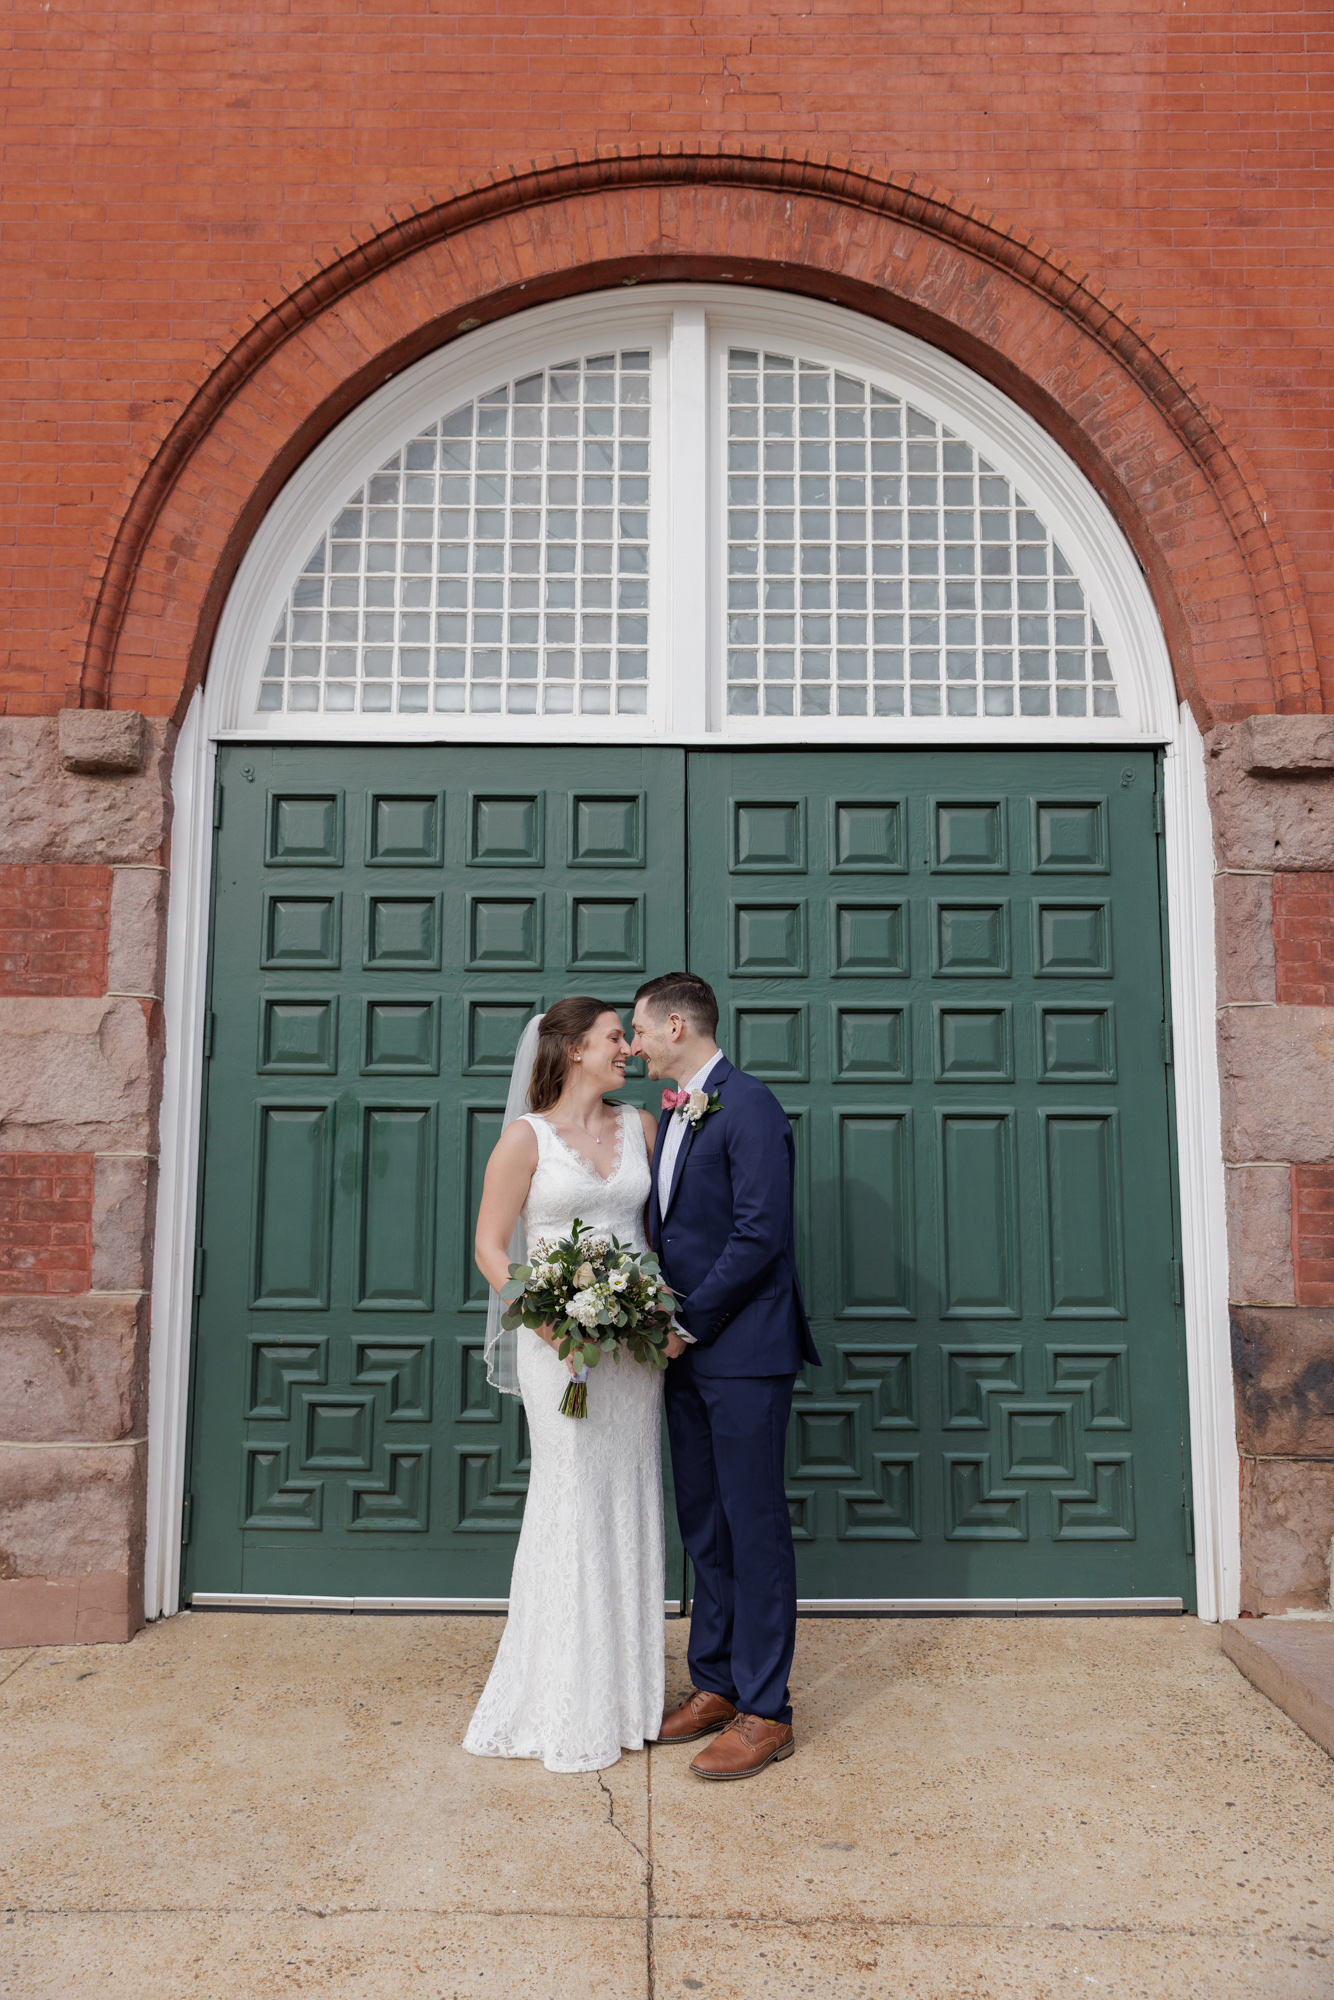 Elegant bride and groom in front of an arched doorway with dark green doors at the historic Old City Hall in Bordentown, NJ